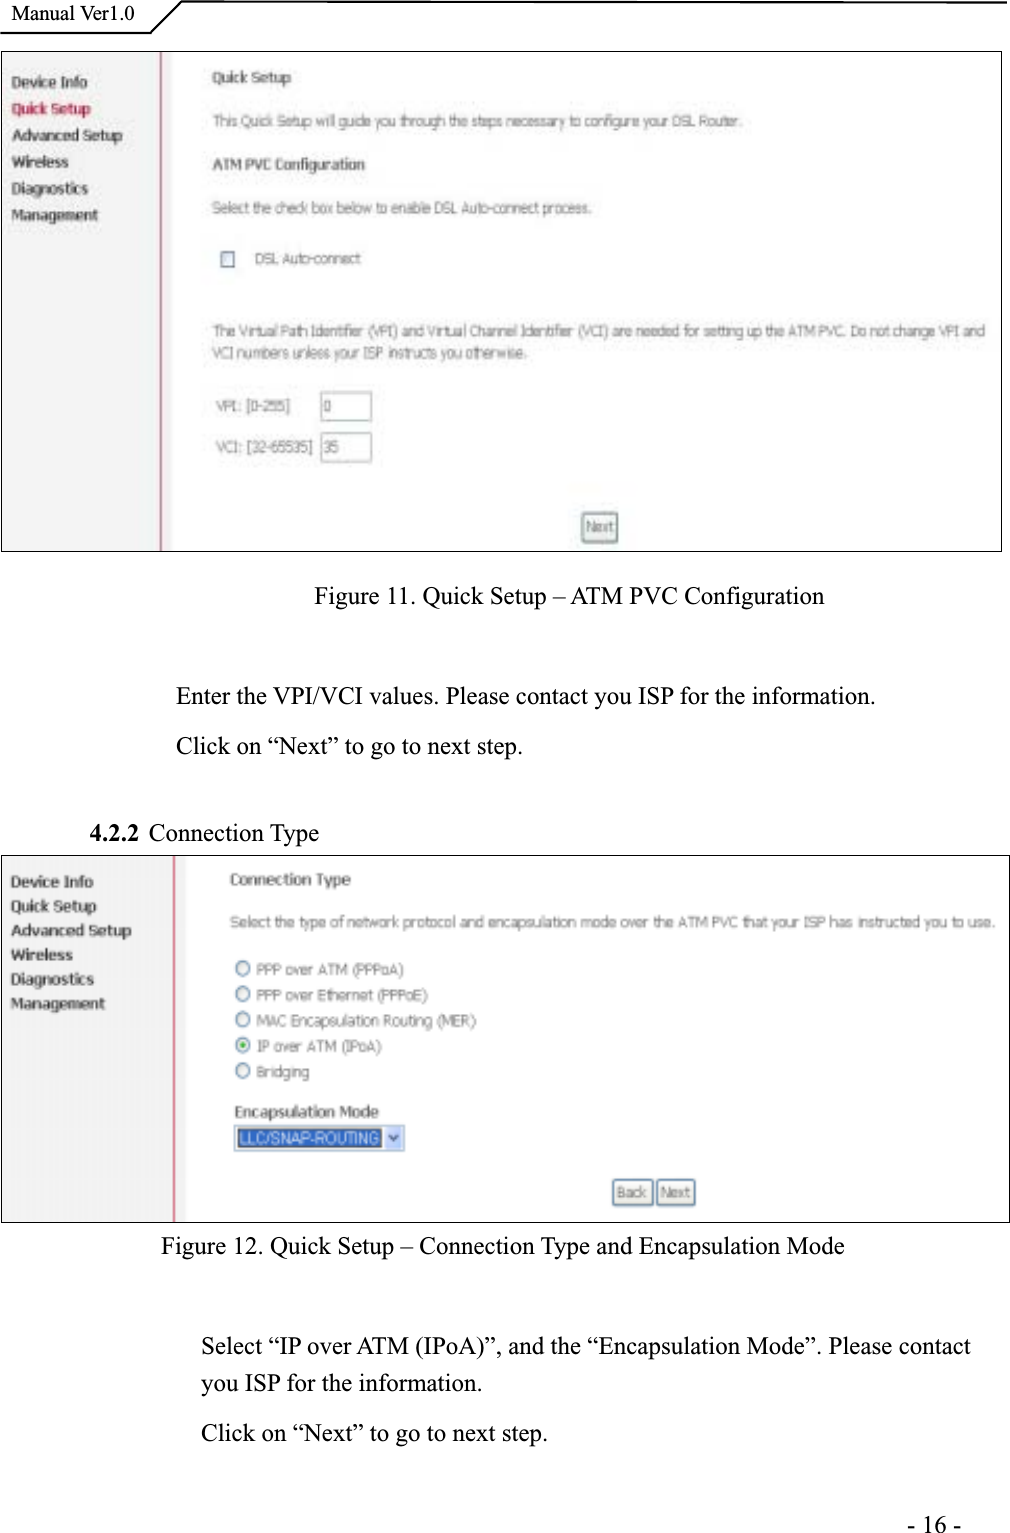  Manual Ver1.0Figure 11. Quick Setup – ATM PVC Configuration Enter the VPI/VCI values. Please contact you ISP for the information.Click on “Next” to go to next step. 4.2.2 Connection TypeFigure 12. Quick Setup – Connection Type and Encapsulation Mode Select “IP over ATM (IPoA)”, and the “Encapsulation Mode”. Please contactyou ISP for the information.Click on “Next” to go to next step.                                                                      -16-